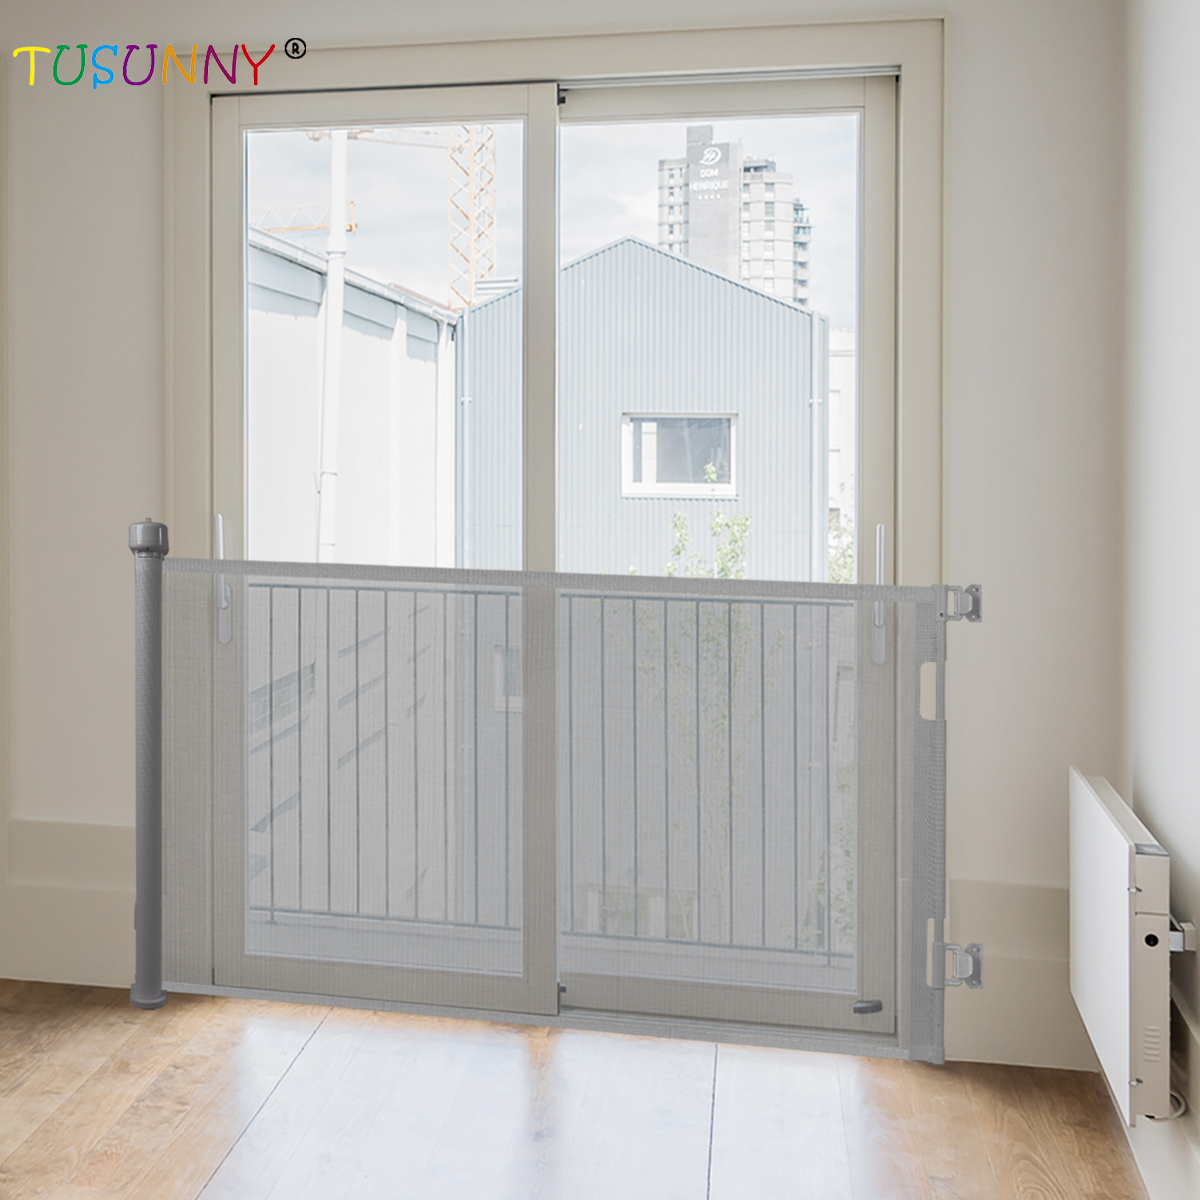 SH20.006B02 Baby Safety Retractable Mesh Gate Extendable Stair Gates For Baby And Pet